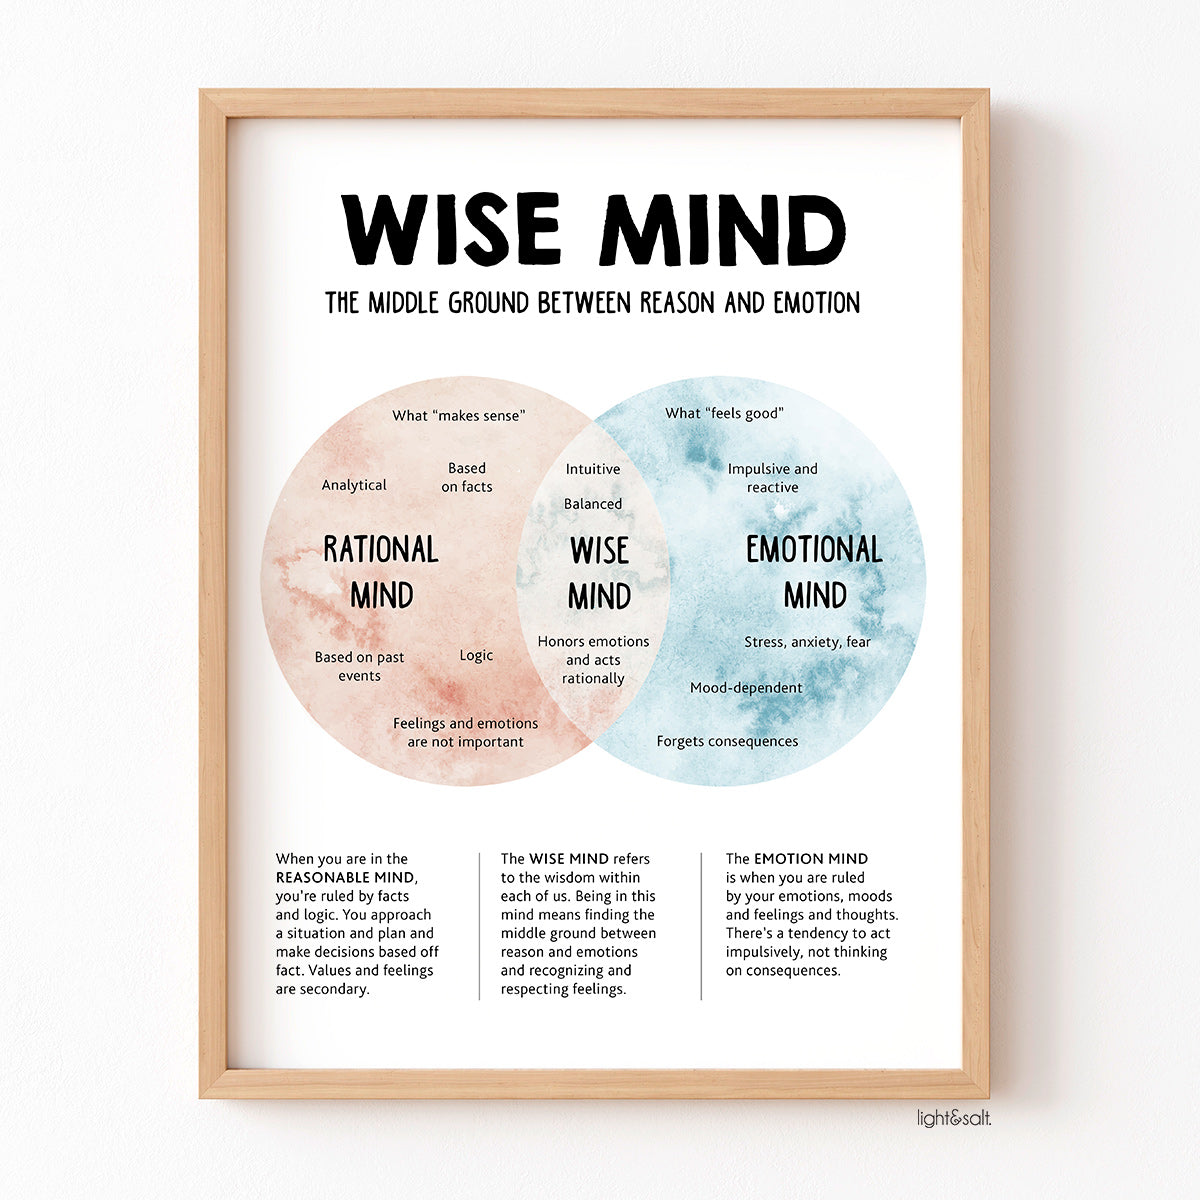 Wise mind poster